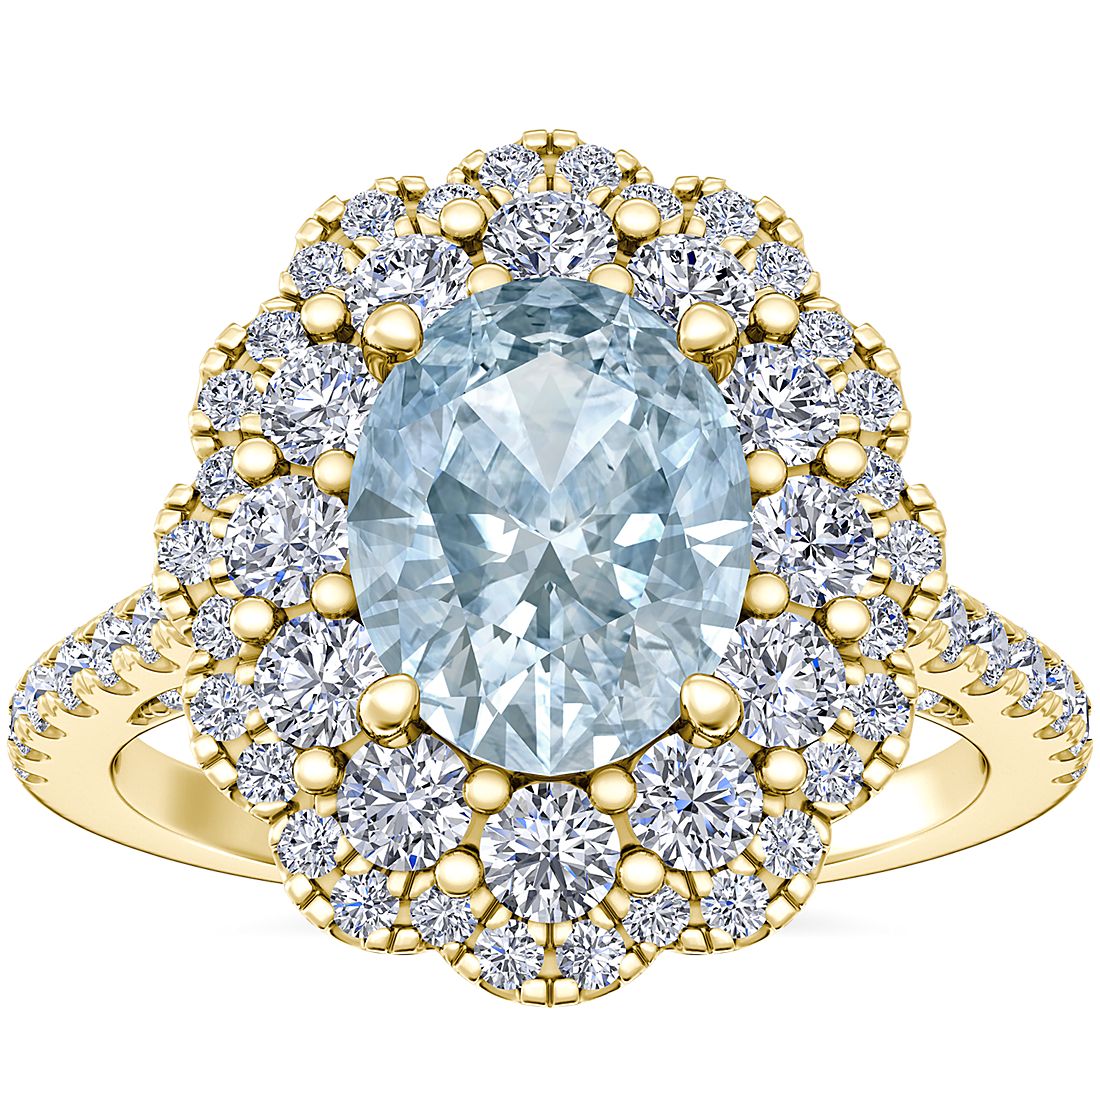 Vintage Diamond Halo Engagement Ring with Oval Aquamarine in 14k Yellow Gold (9x7mm)